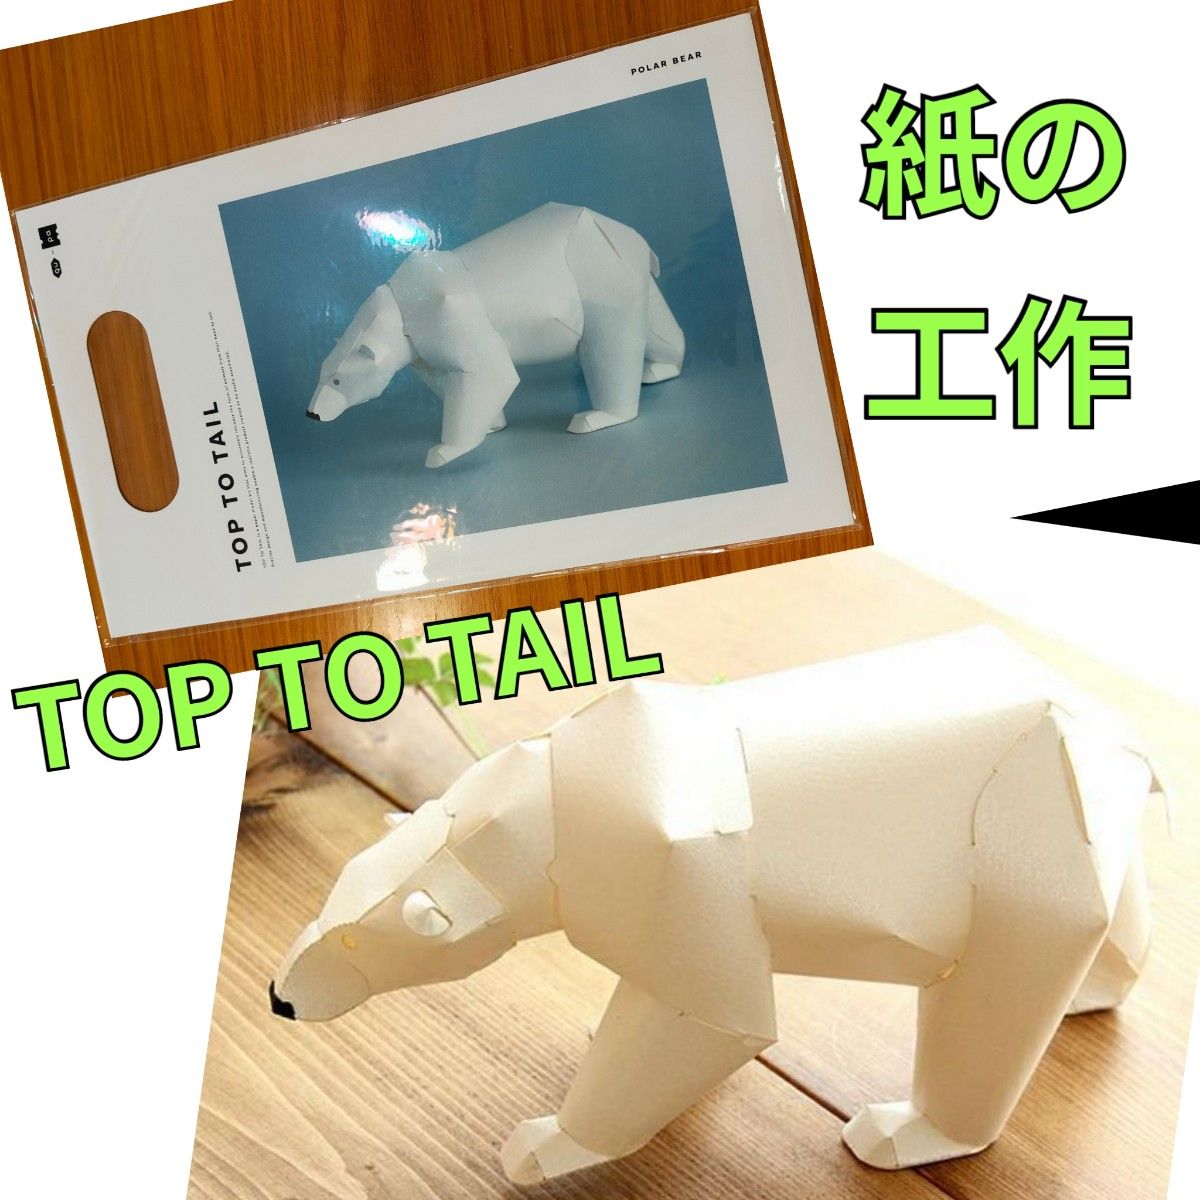 TOP TO TAIL　 シロクマ　白熊　　福永紙工　ペーパークラフト　工作